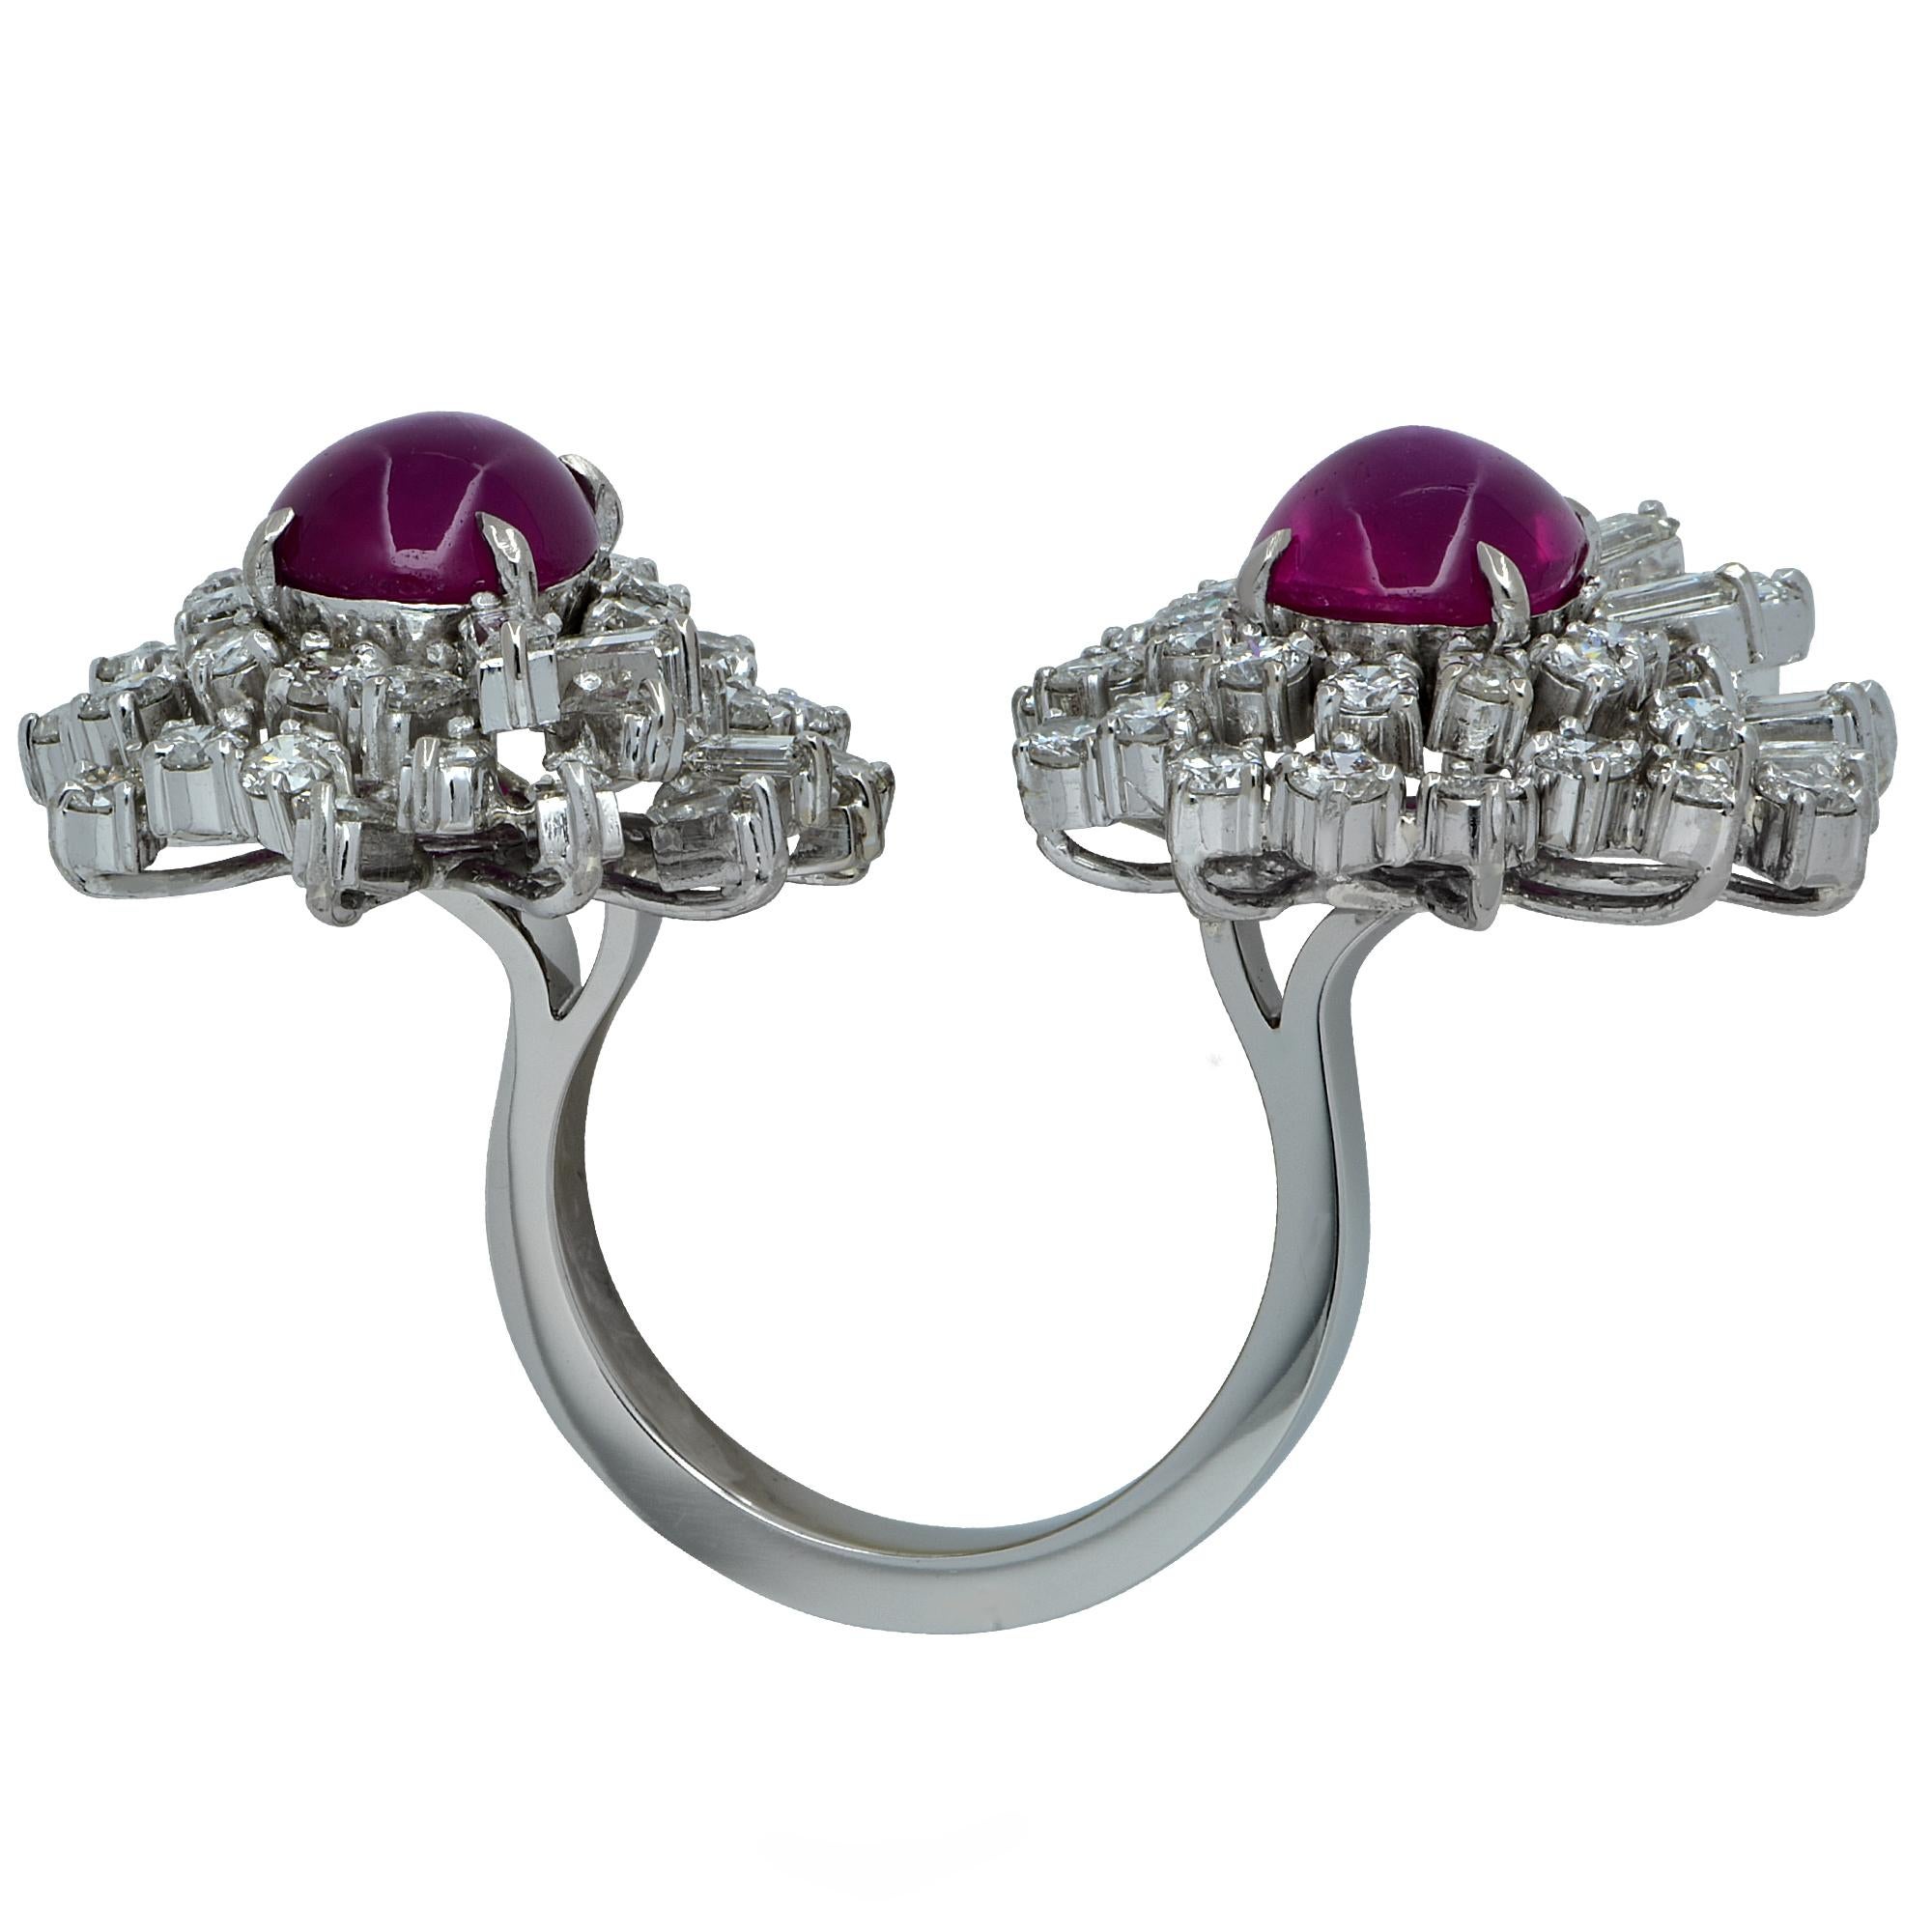 Platinum bypass ring containing a spectacular pair of extremely fine unheated burma rubies weighing approximately 8cts total, surrounded by approximately 5cts of mixed cut diamonds. Accompanied by an AGL Report

Our pieces are all accompanied by an